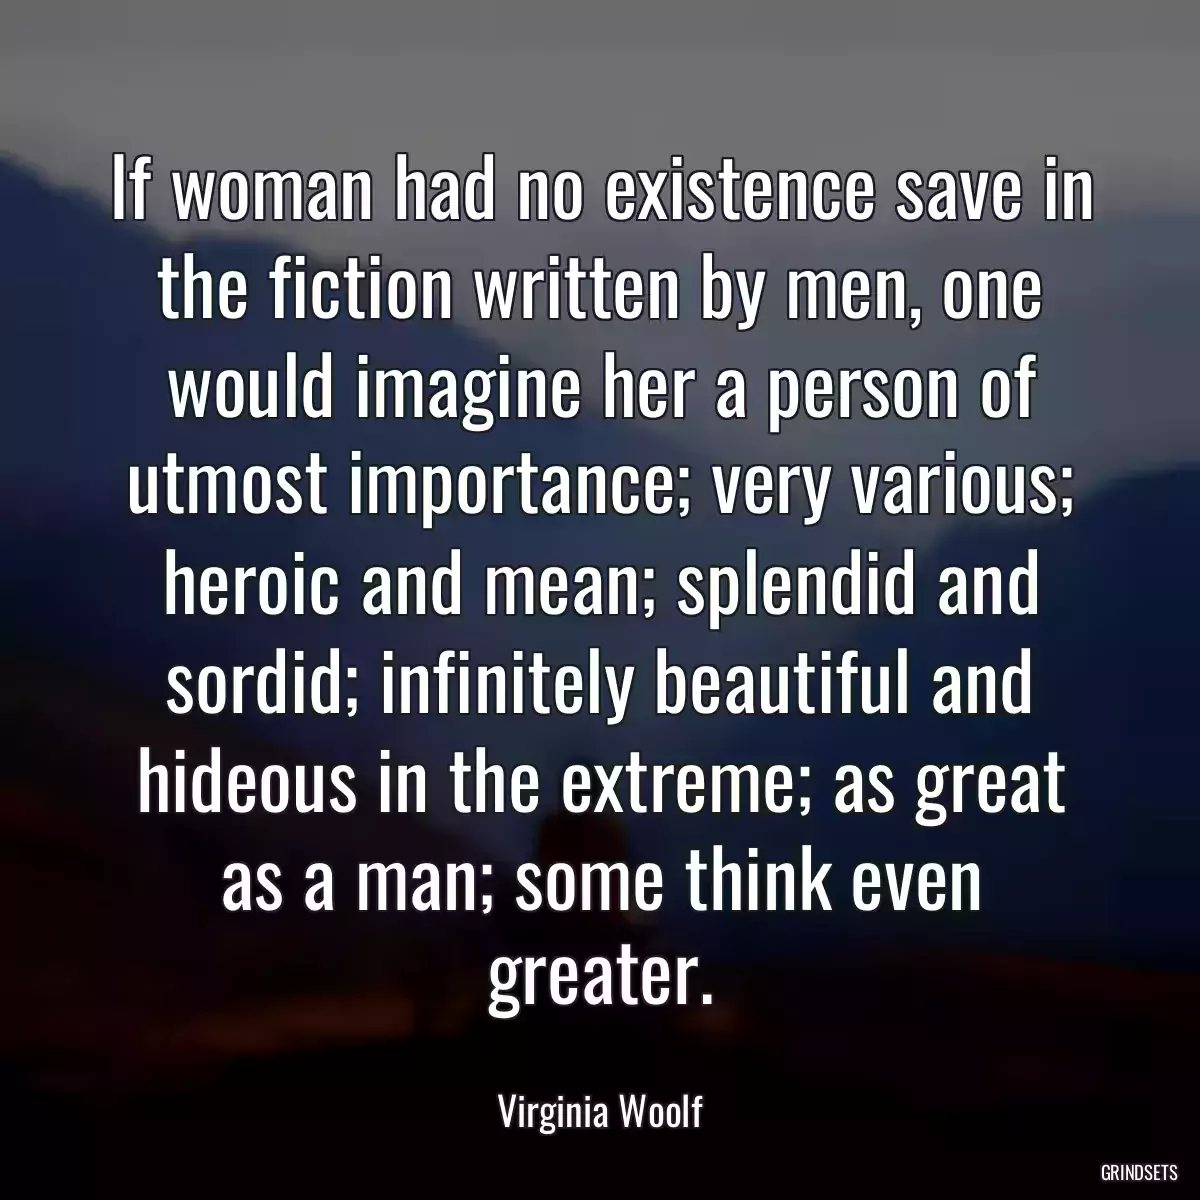 If woman had no existence save in the fiction written by men, one would imagine her a person of utmost importance; very various; heroic and mean; splendid and sordid; infinitely beautiful and hideous in the extreme; as great as a man; some think even greater.